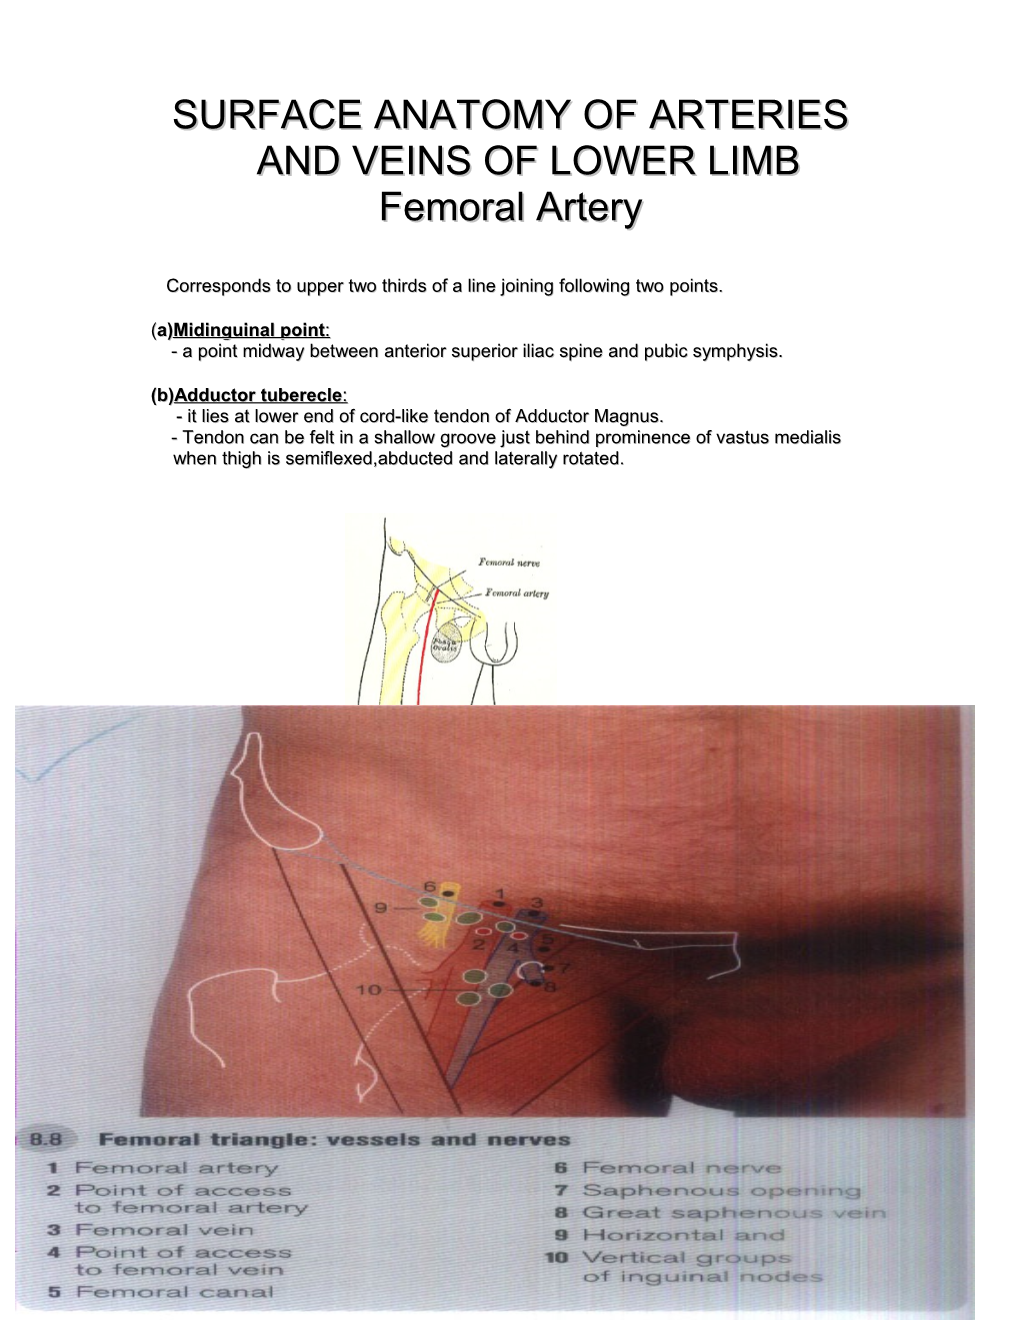 Surface Anatomy of Arteries and Veins of Lower Limb